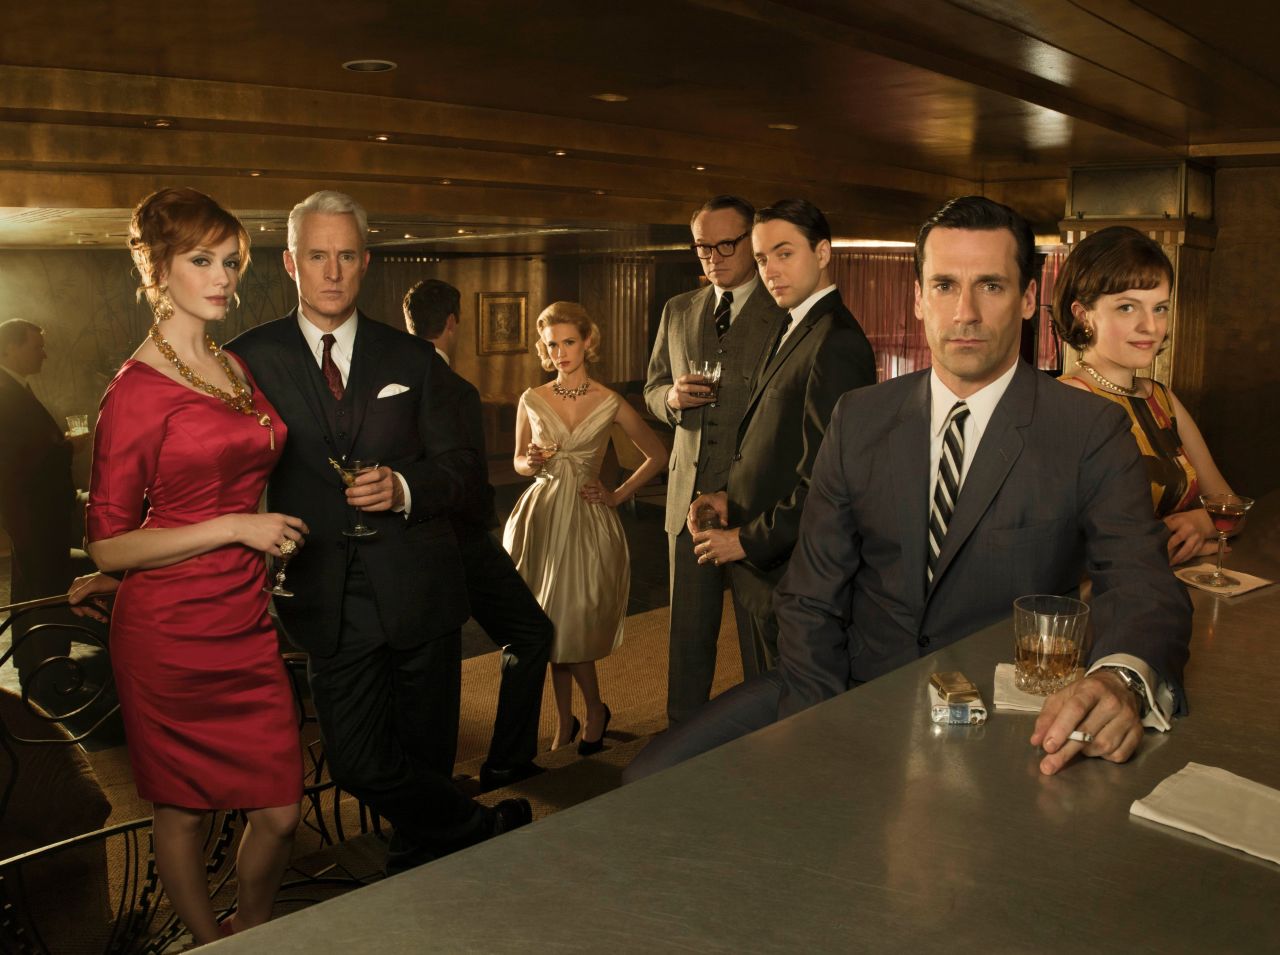 From left, Joan; Roger; Betty; Lane Pryce (Jared Harris), who joins the firm from the UK; Pete, Don and Peggy strike a pose during season 4. Peggy has become a noted copywriter by this point in the series.